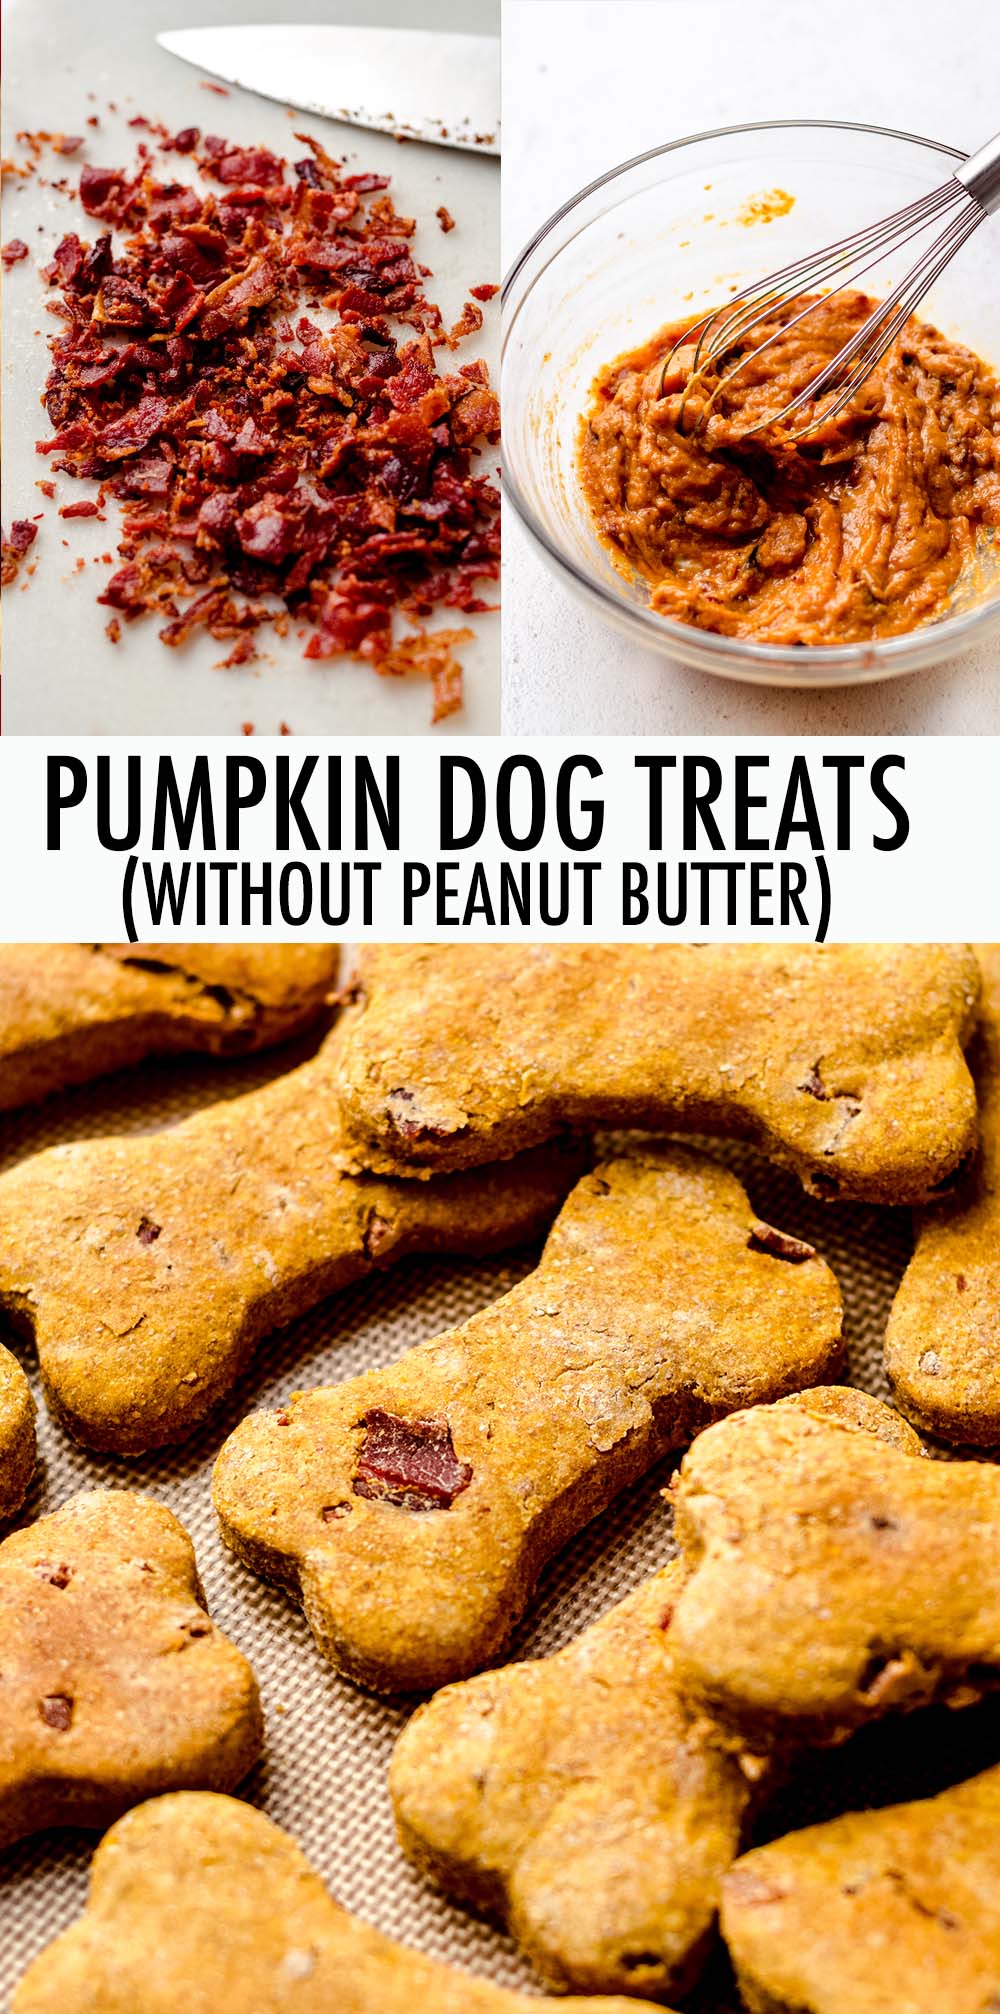 Simple homemade pumpkin dog treats made with pumpkin puree, whole wheat flour, and bacon. These treats are also made without peanut butter, so they're great for homes with a peanut allergy! via @frshaprilflours